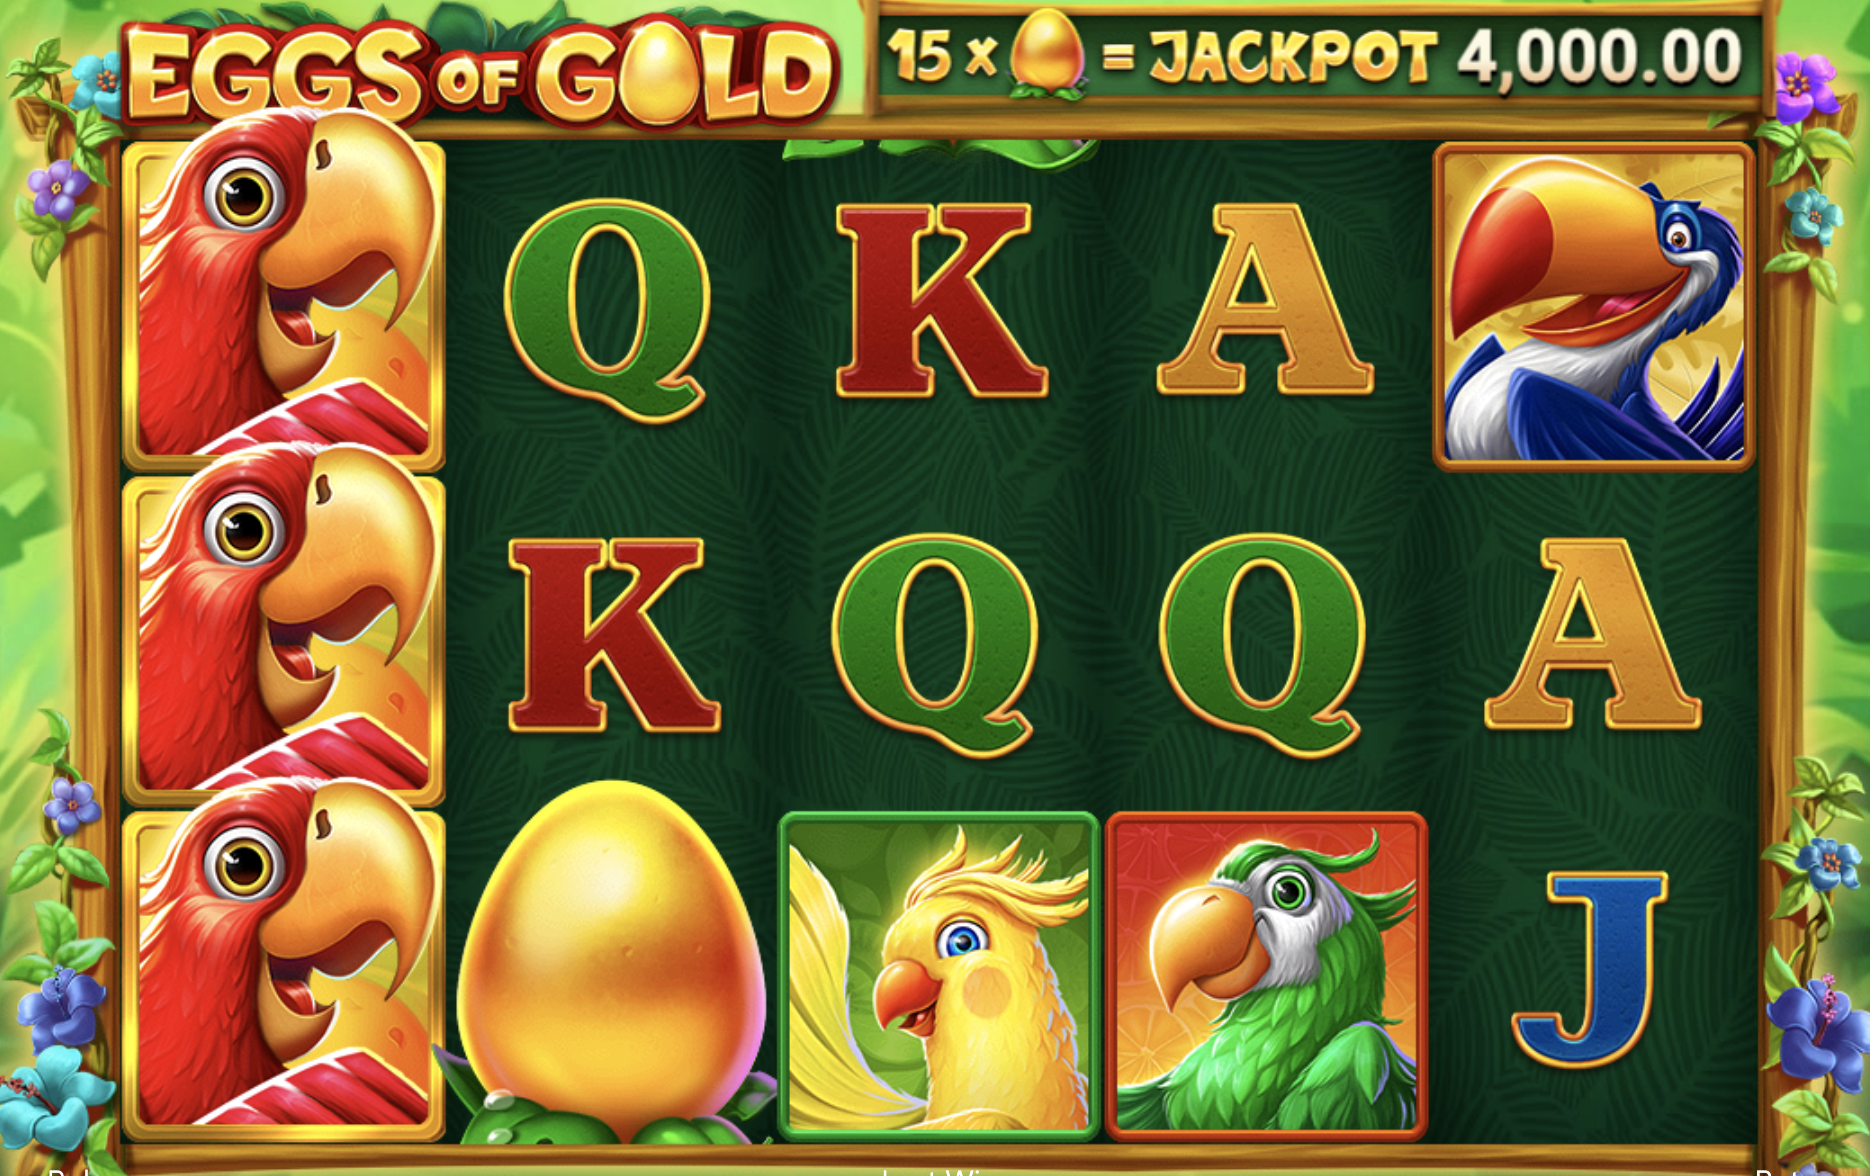 Best Online Slots for High Payouts and Real Money